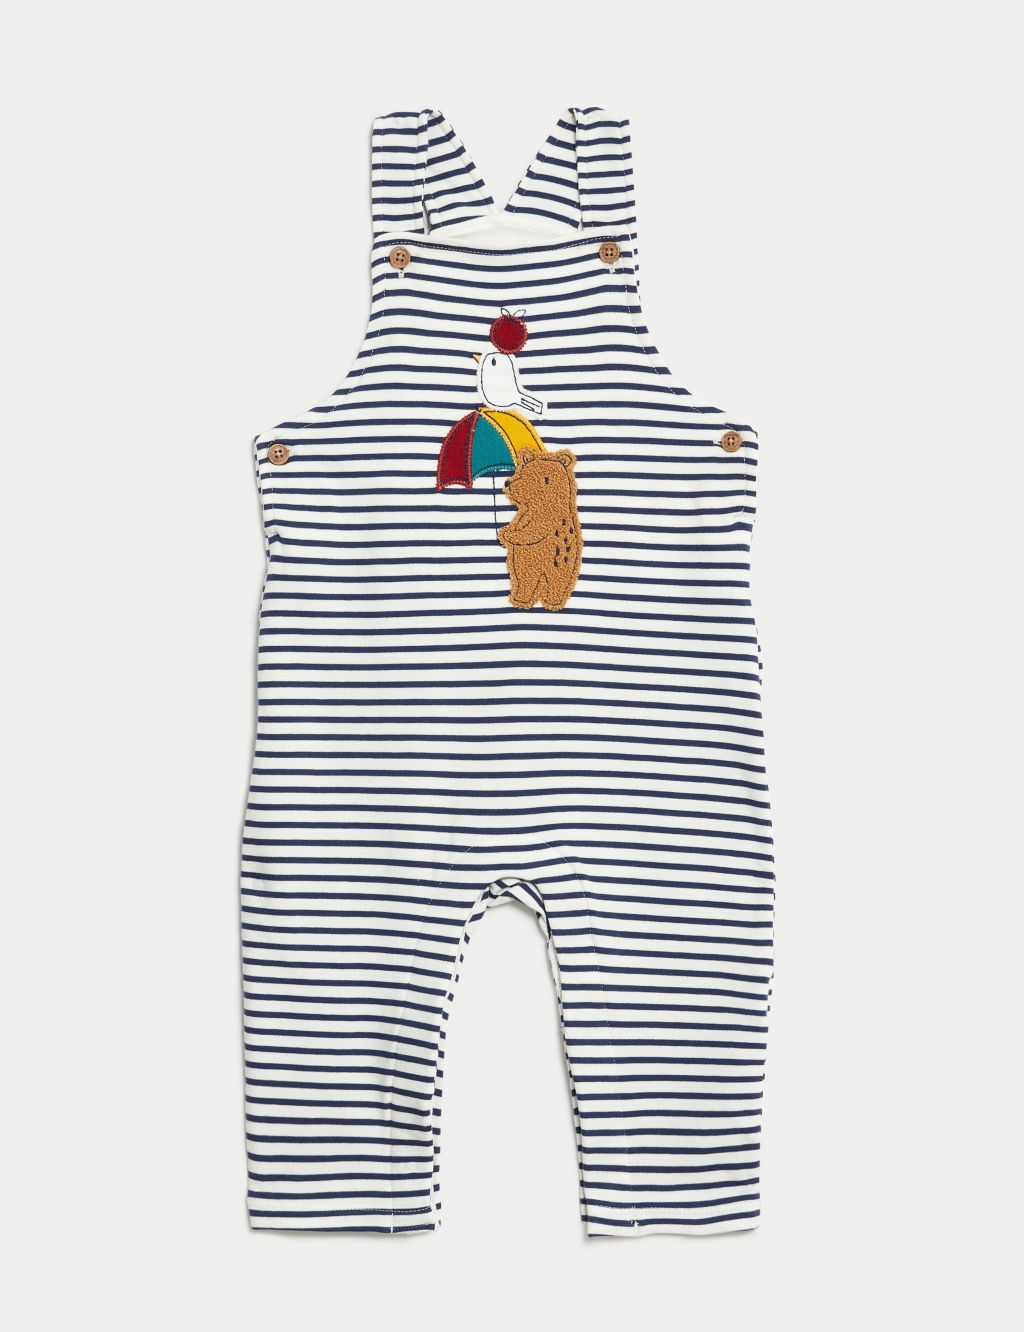 2pc Cotton Rich Striped Outfit (0-3 Yrs) image 3